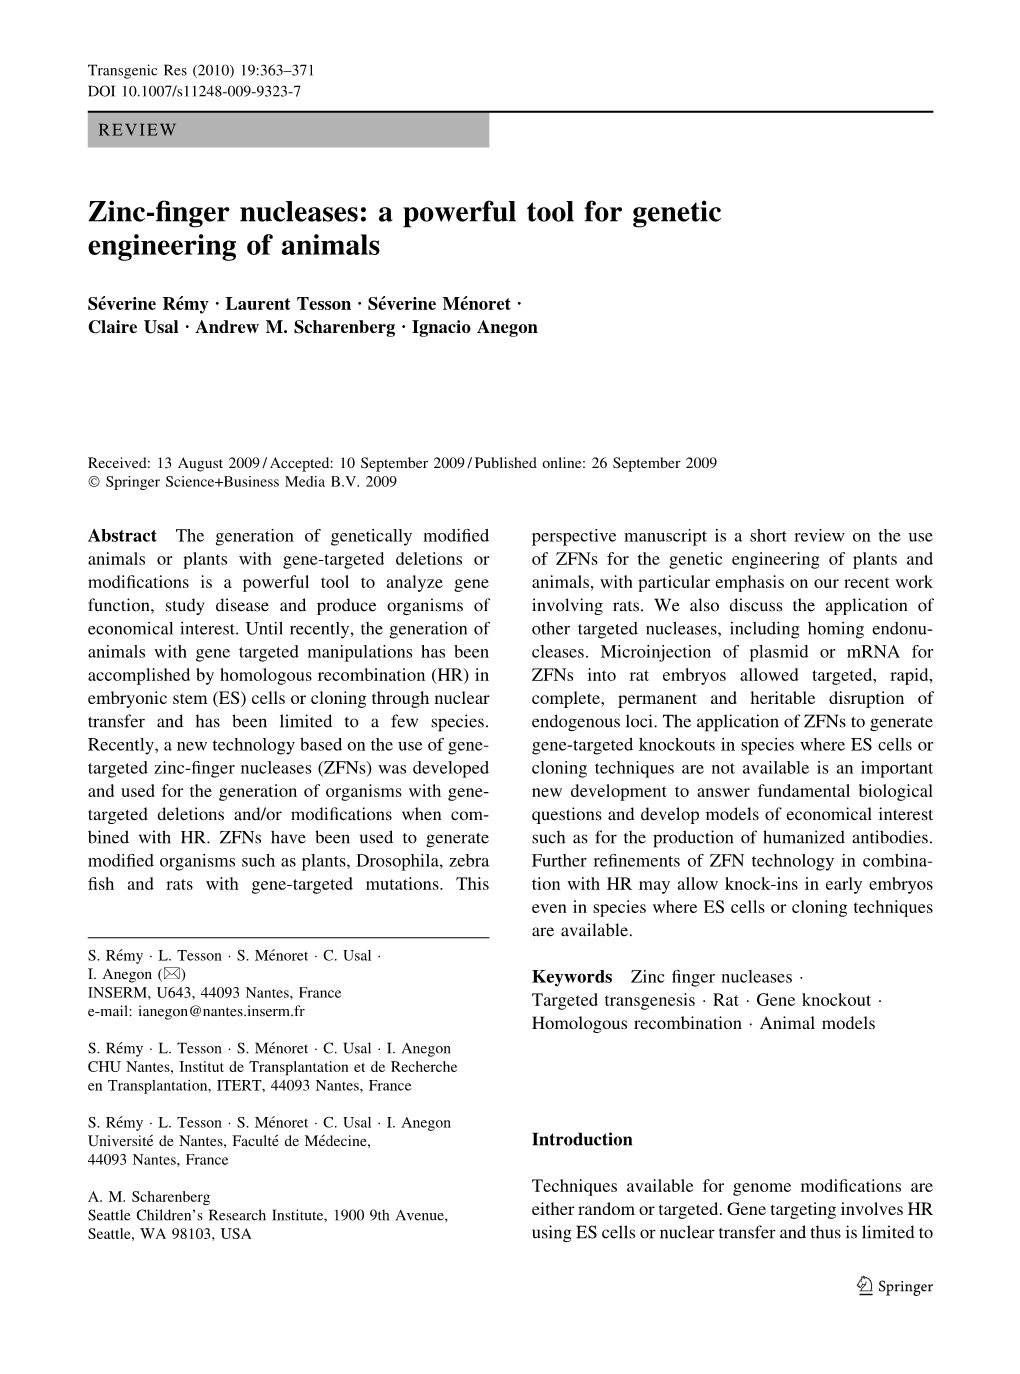 Zinc-Finger Nucleases: a Powerful Tool for Genetic Engineering of Animals